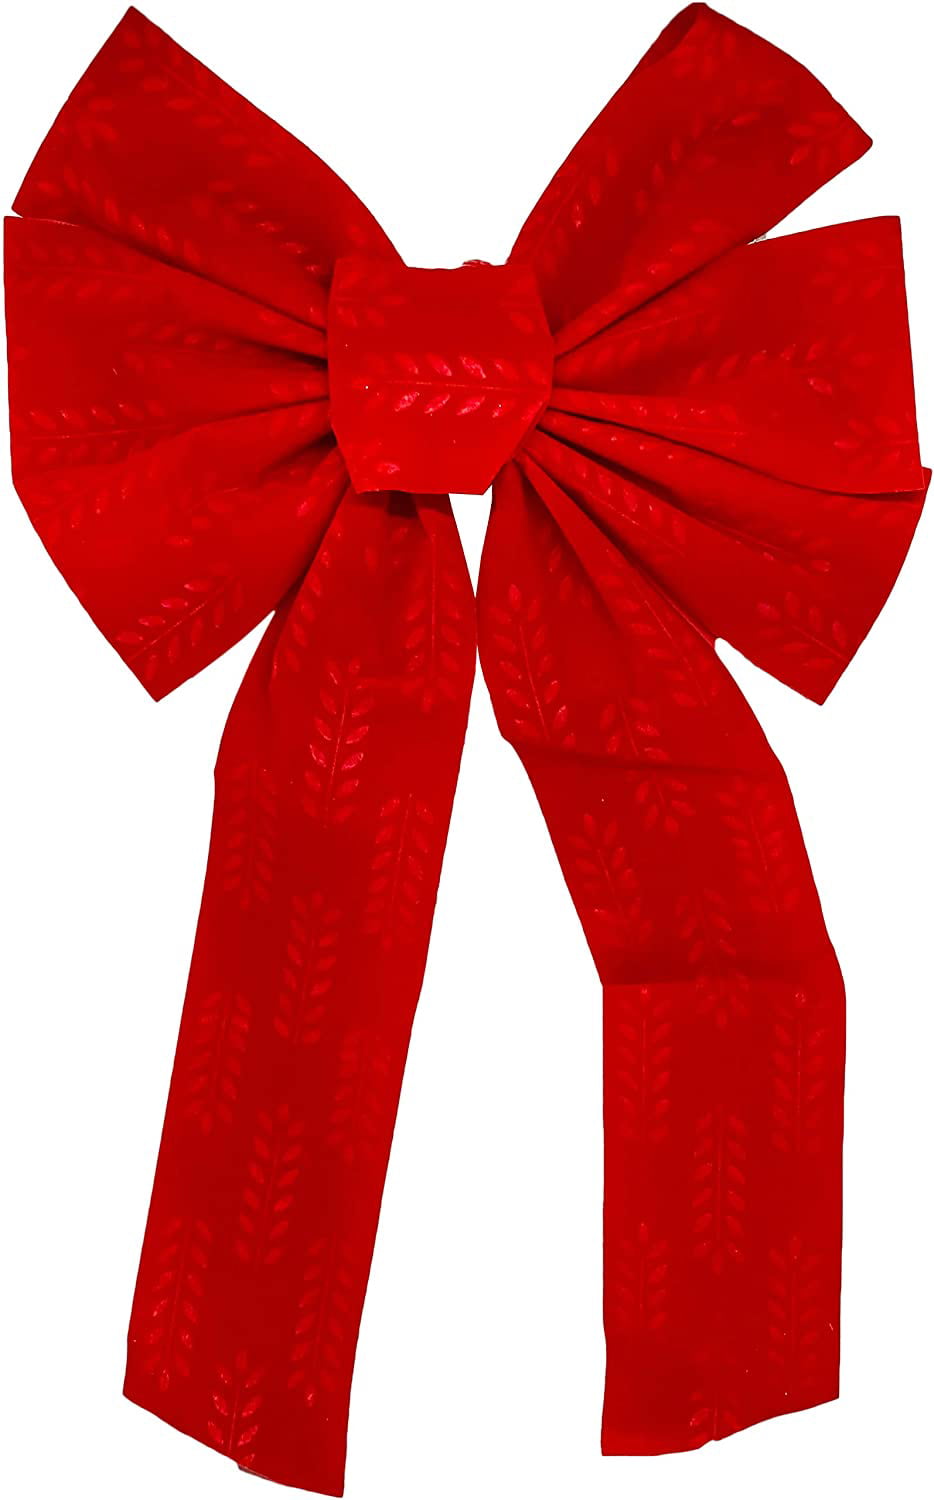 Lakiyfye Christmas Bows Decor Pack Of 6,Red Bows For Christmas Tree Red  Velvet Fabric Bows Can Be T, Facebook Marketplace